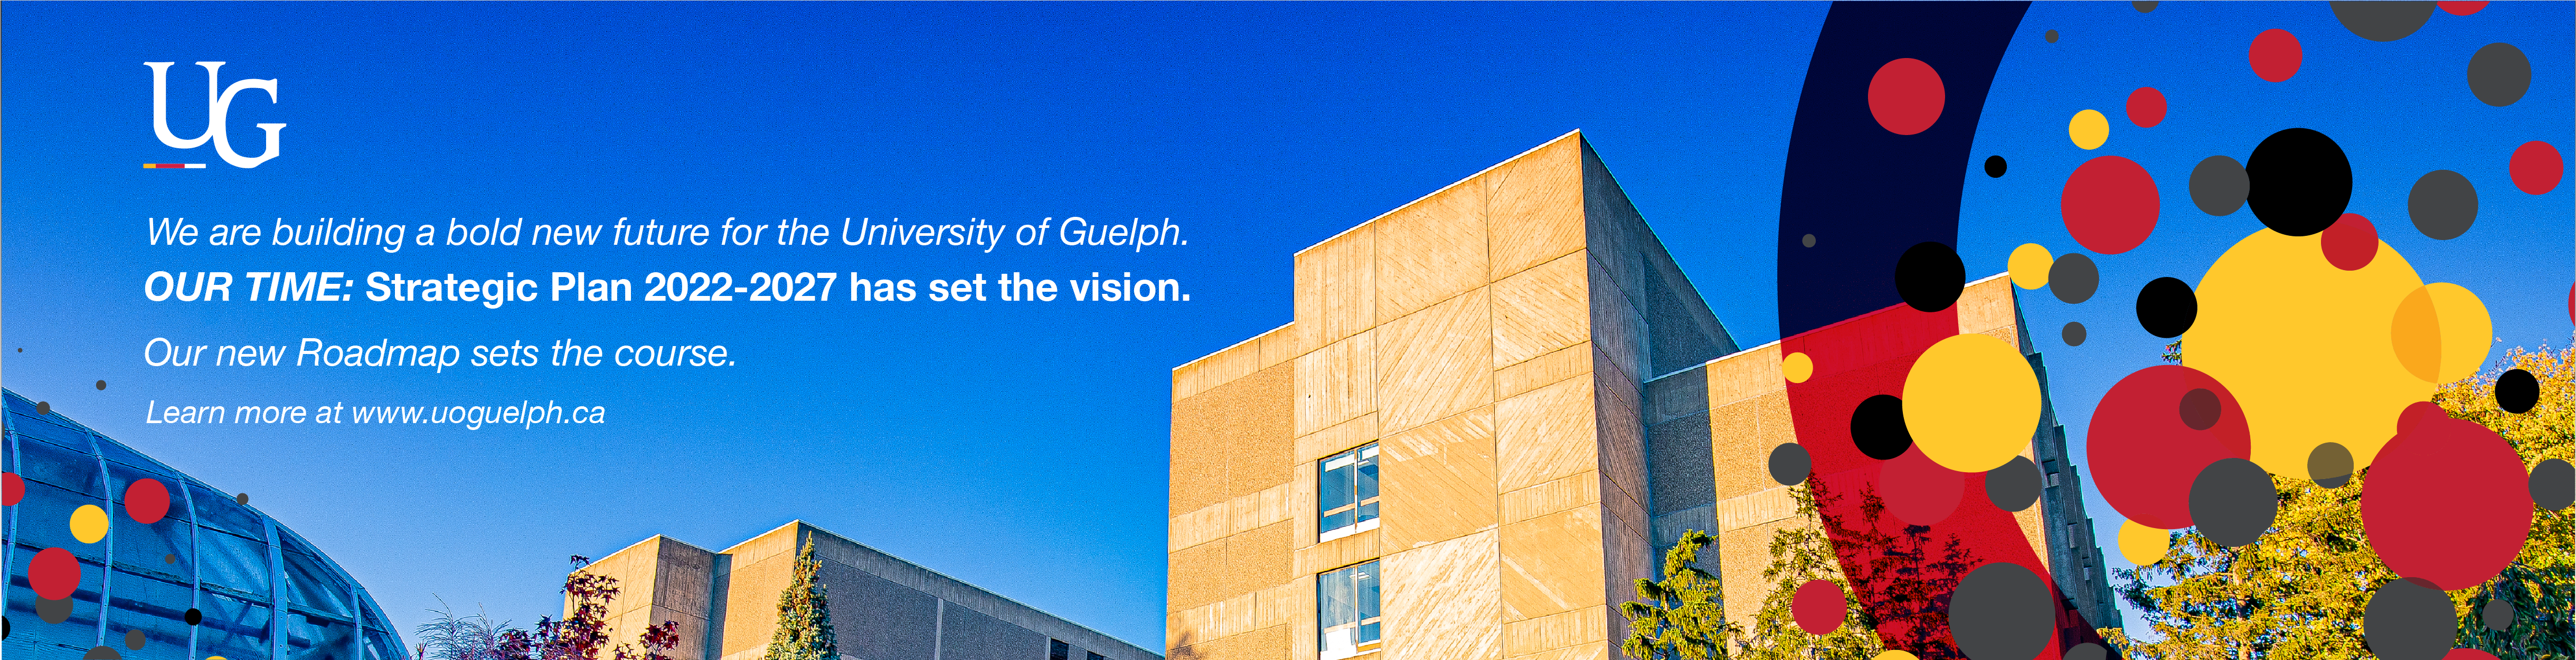 We are building a bold new future for the University of Guelph. Our Time: Strategic Plan 2022-2027 has set the vision. Our new roadmap sets the course. Learn more at www.uoguelph.ca. 